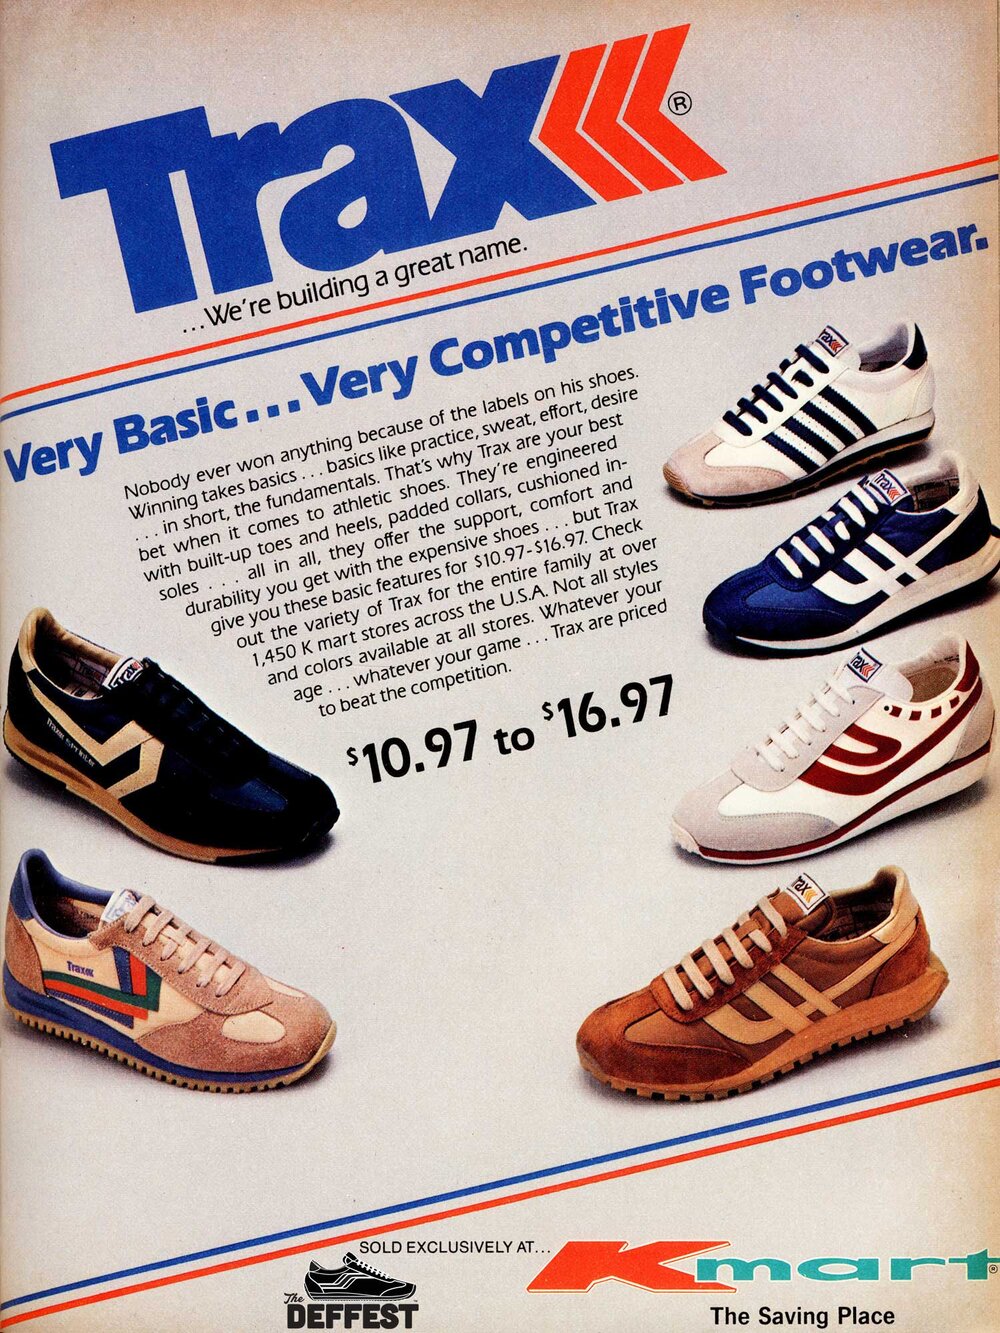 Trax+by+Kmart+1979+vintage+sneaker+ad+%40+The+Deffest